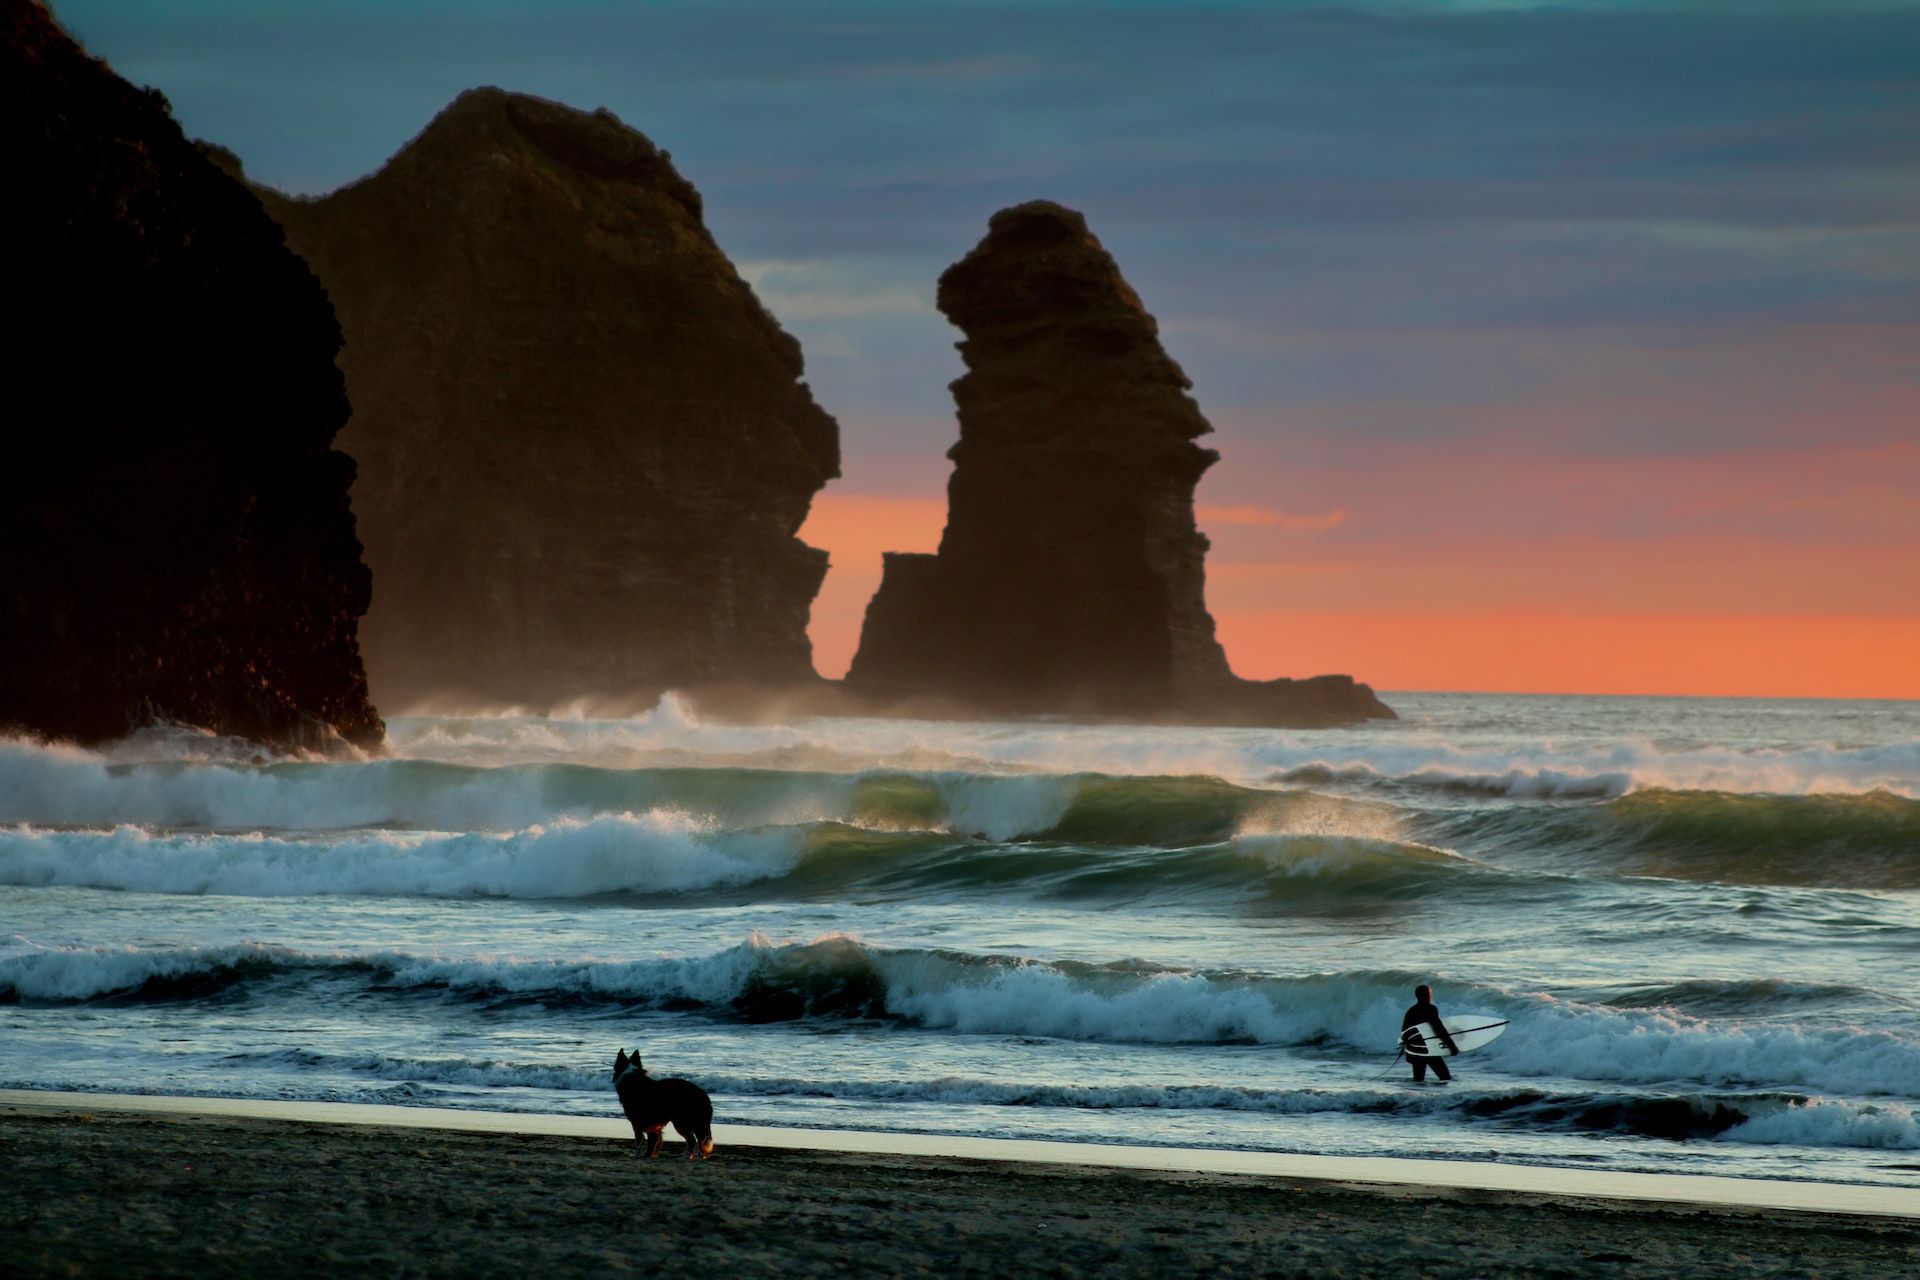 A surfer surfing the waves at Piha Beach in Auckland, New Zealand